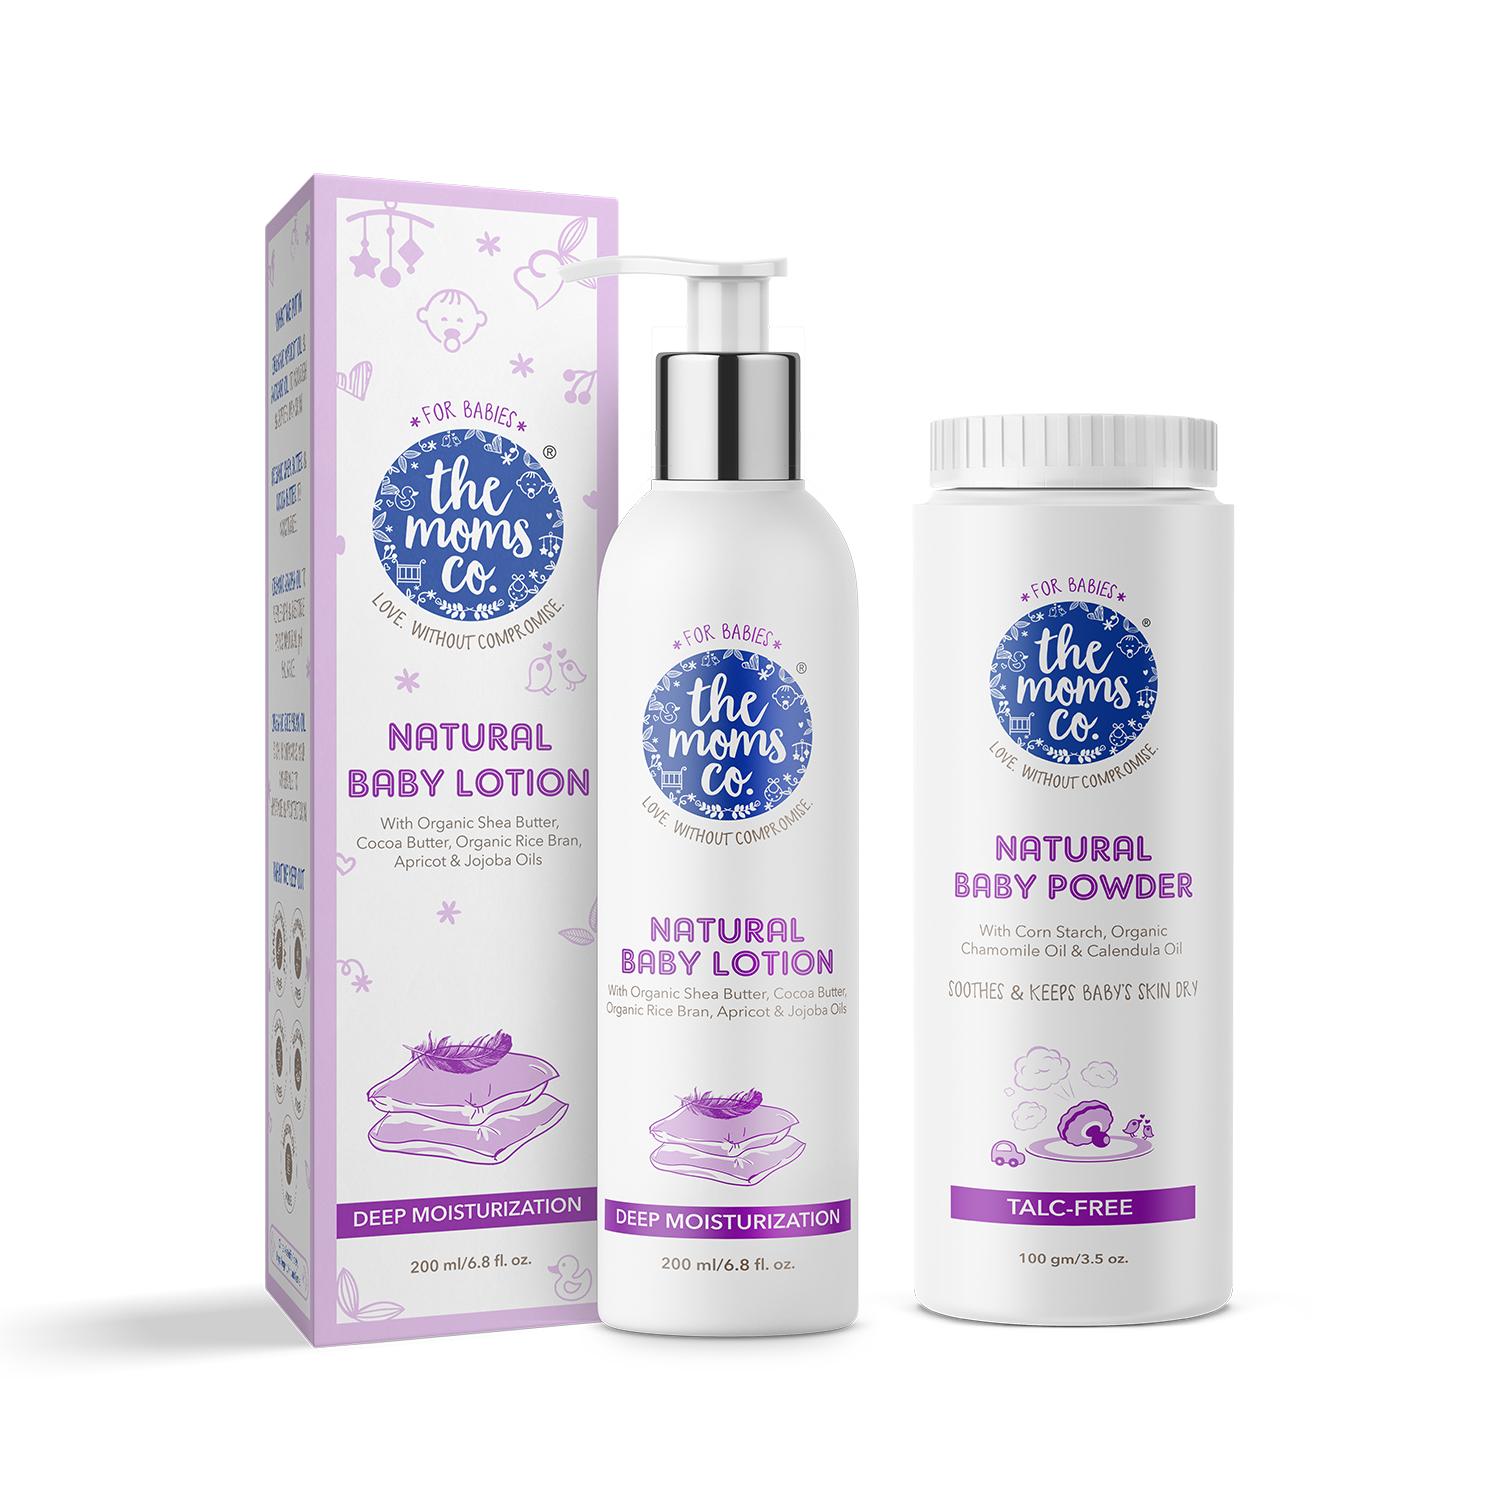 The Mom's Co. Talc-Free Natural Baby Powder & Natural Baby Lotion Combo